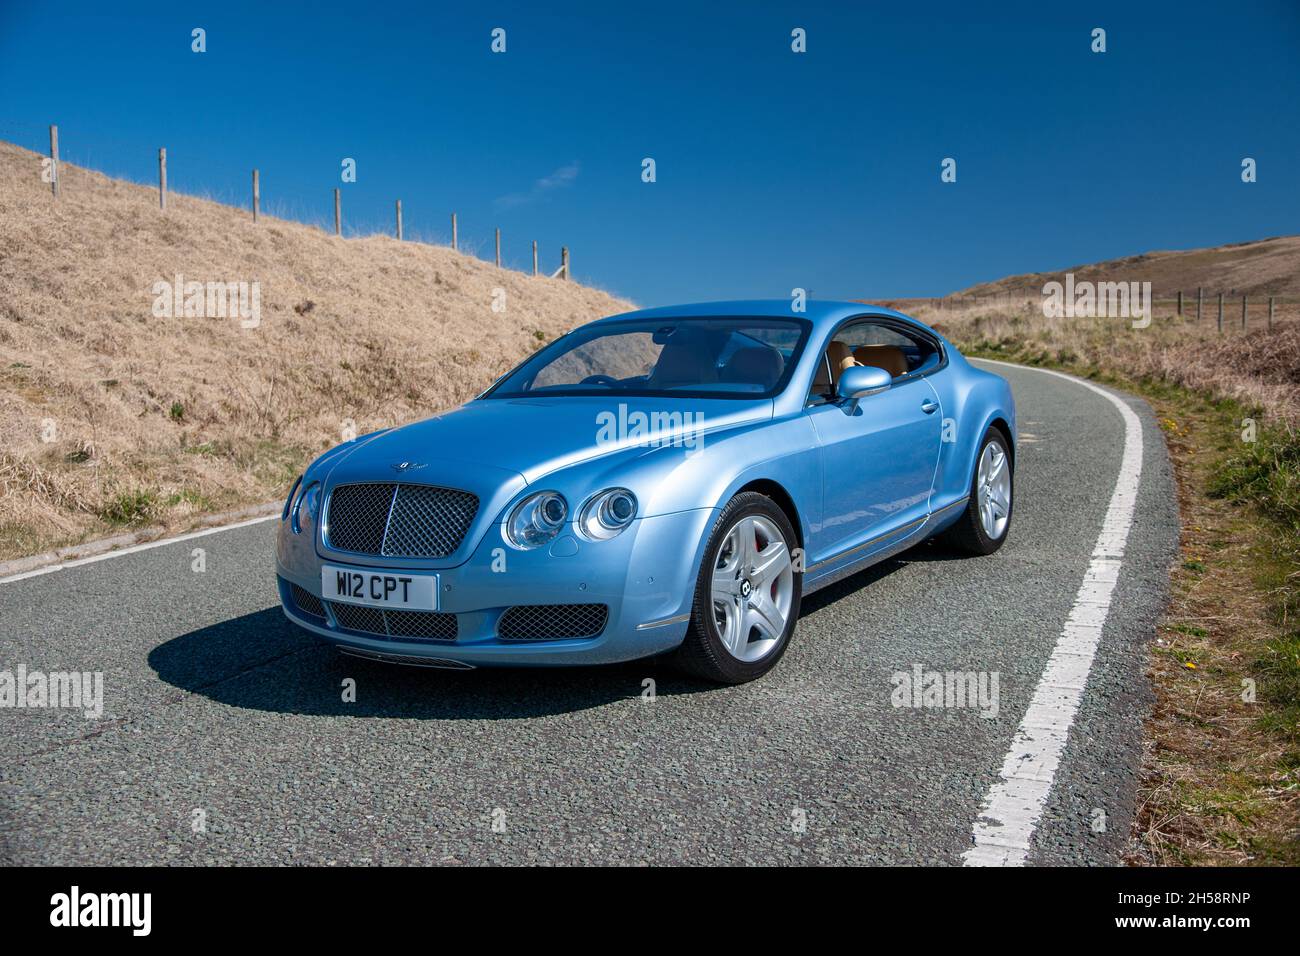 https://c8.alamy.com/comp/2H58RNP/bentley-gt-speed-coupe-w12-parked-on-a-country-lane-on-a-sunny-day-in-spring-2H58RNP.jpg